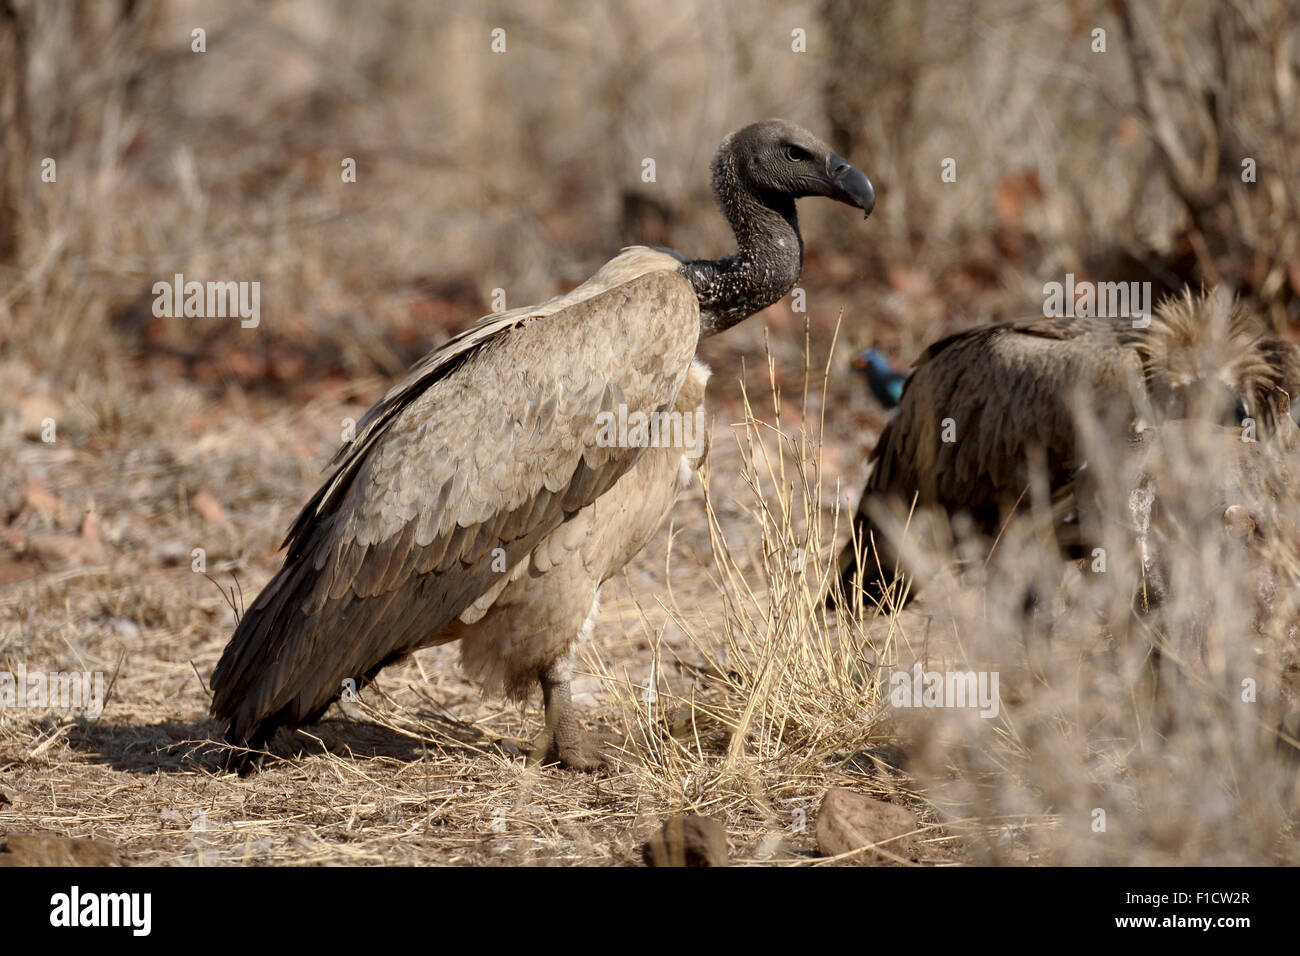 African white-backed vulture, Gyps africanus, singolo uccello sul pavimento, Sud Africa, Agosto 2015 Foto Stock